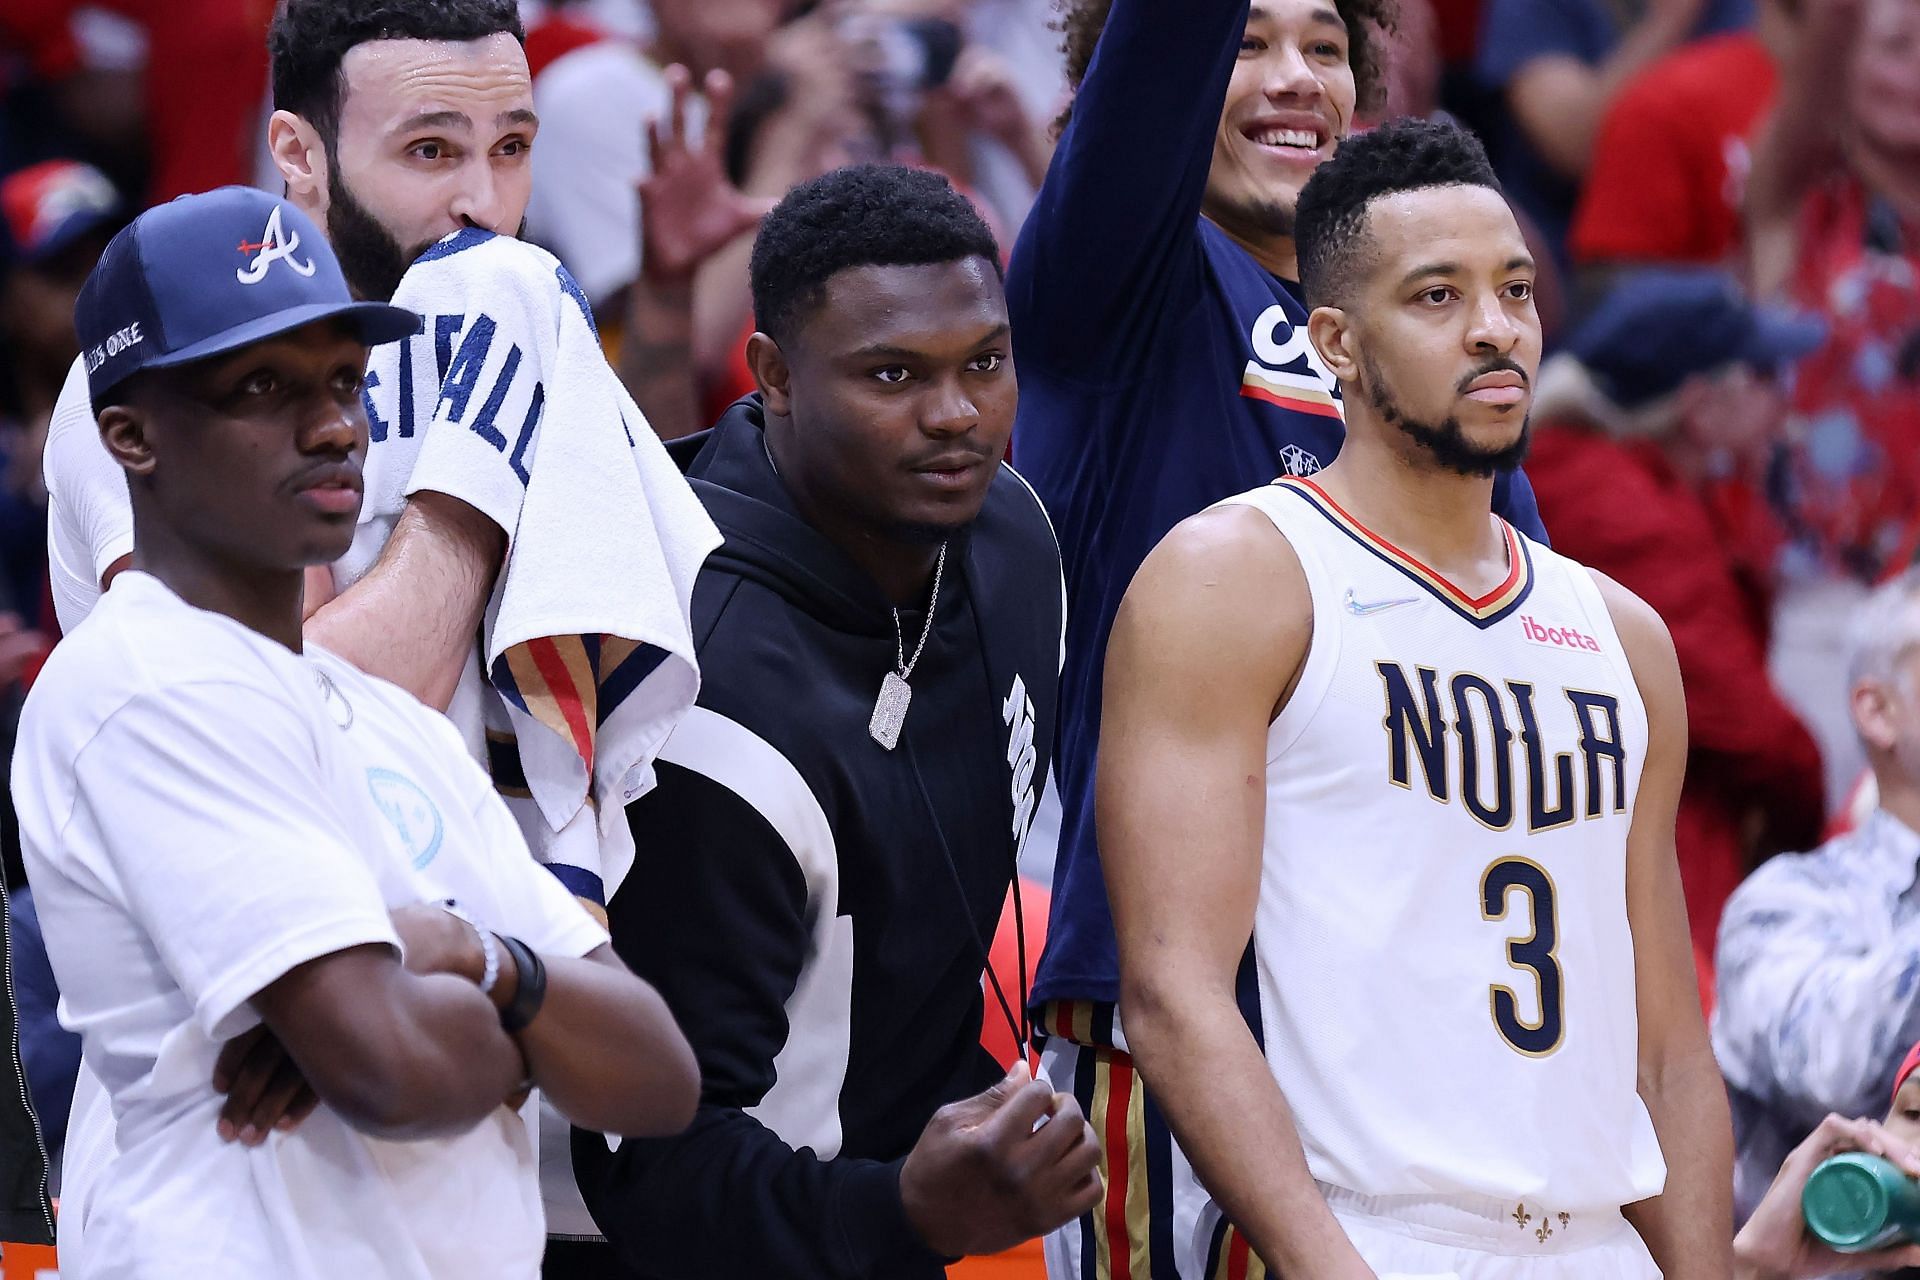 Zion Williamson (in black) supporting the Pelicans from the sideline in Game 4